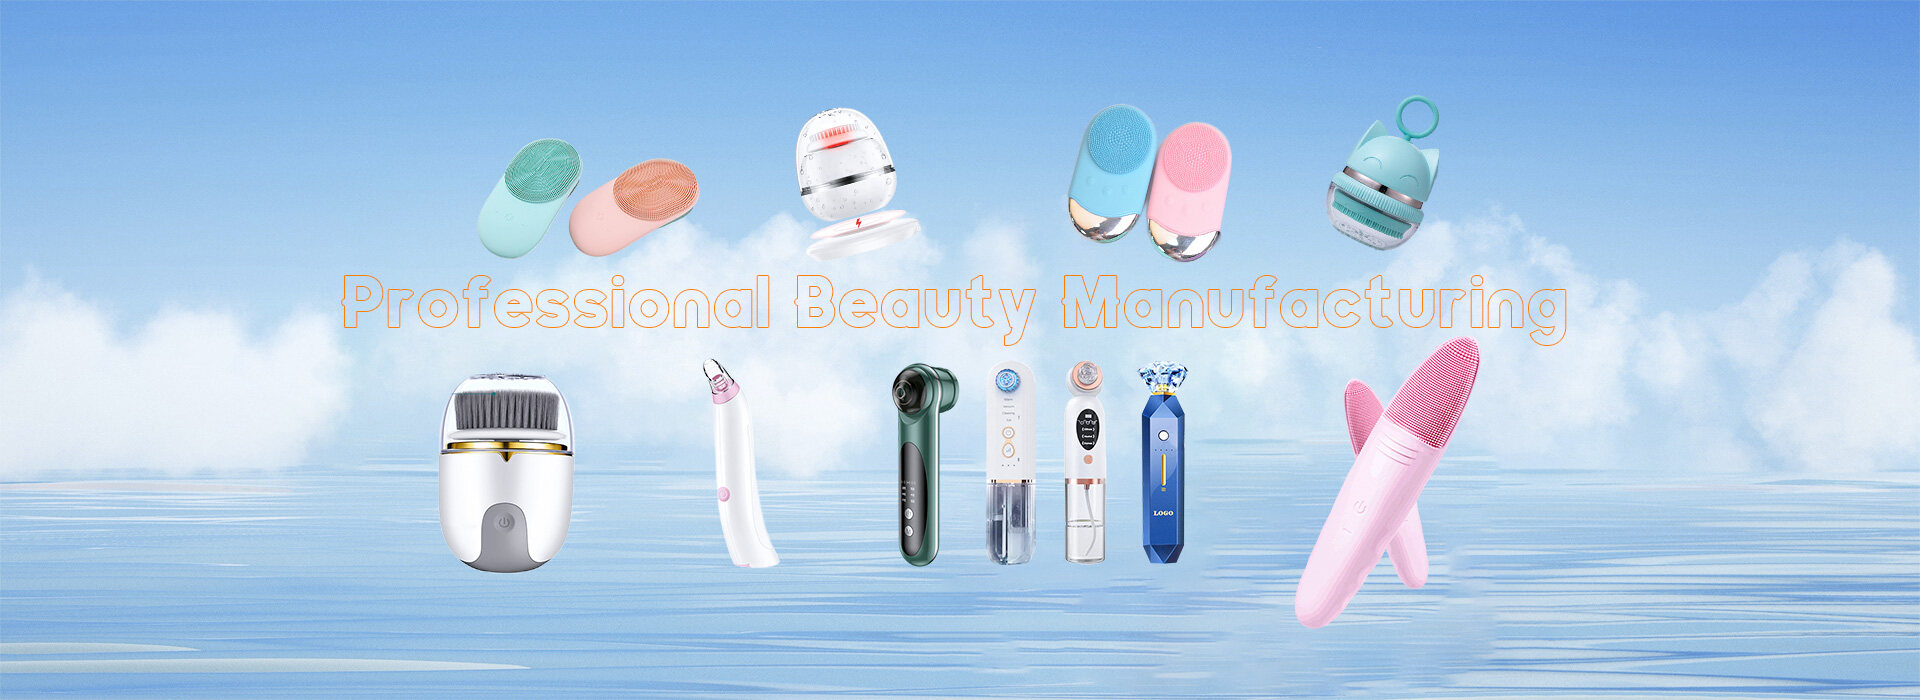 Facial Cleansing Massager Anti-aging Skin Care Device For All Skin Types,Custom LOGO Electric Waterproof Skin Care Device Vibration Led Light Silicone Facial Cleansing Brush Face Massager,Silicon Electric Battery Exfoliating Face Cleaning Tool Face Brush Cleaner With Rechargeable Stand,Hot Sale 2022 Private Label Electric Cleansing Brush Facial Cleaning Face Brush Device Electric Soft Silicone,Mini Skin Care Device Electric Exfoliating Facial Massager Vibrating Silicone Facial Cleansing Brush